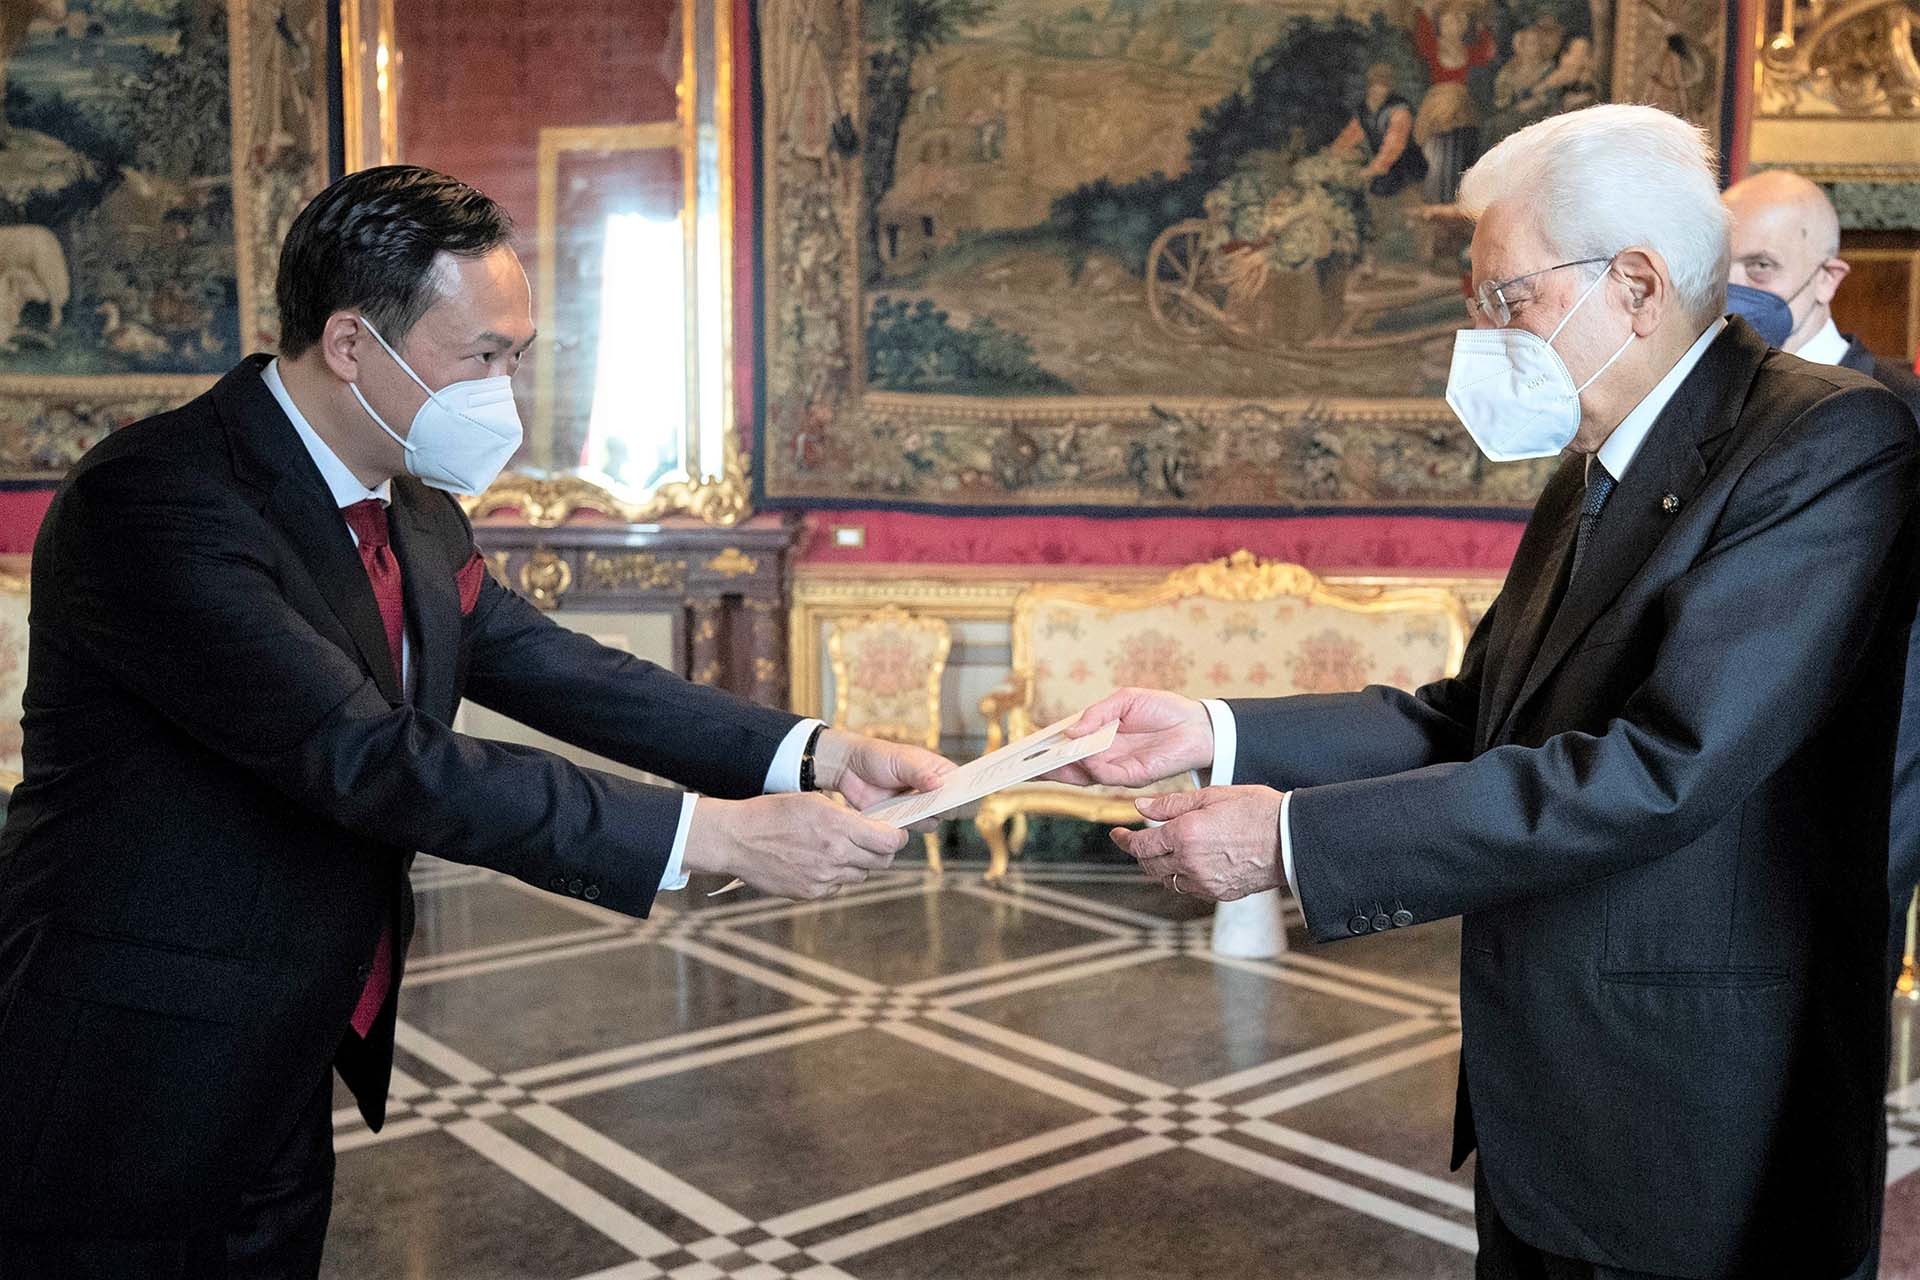 Italy attaches importance to relations with Viet Nam: President Mattarella